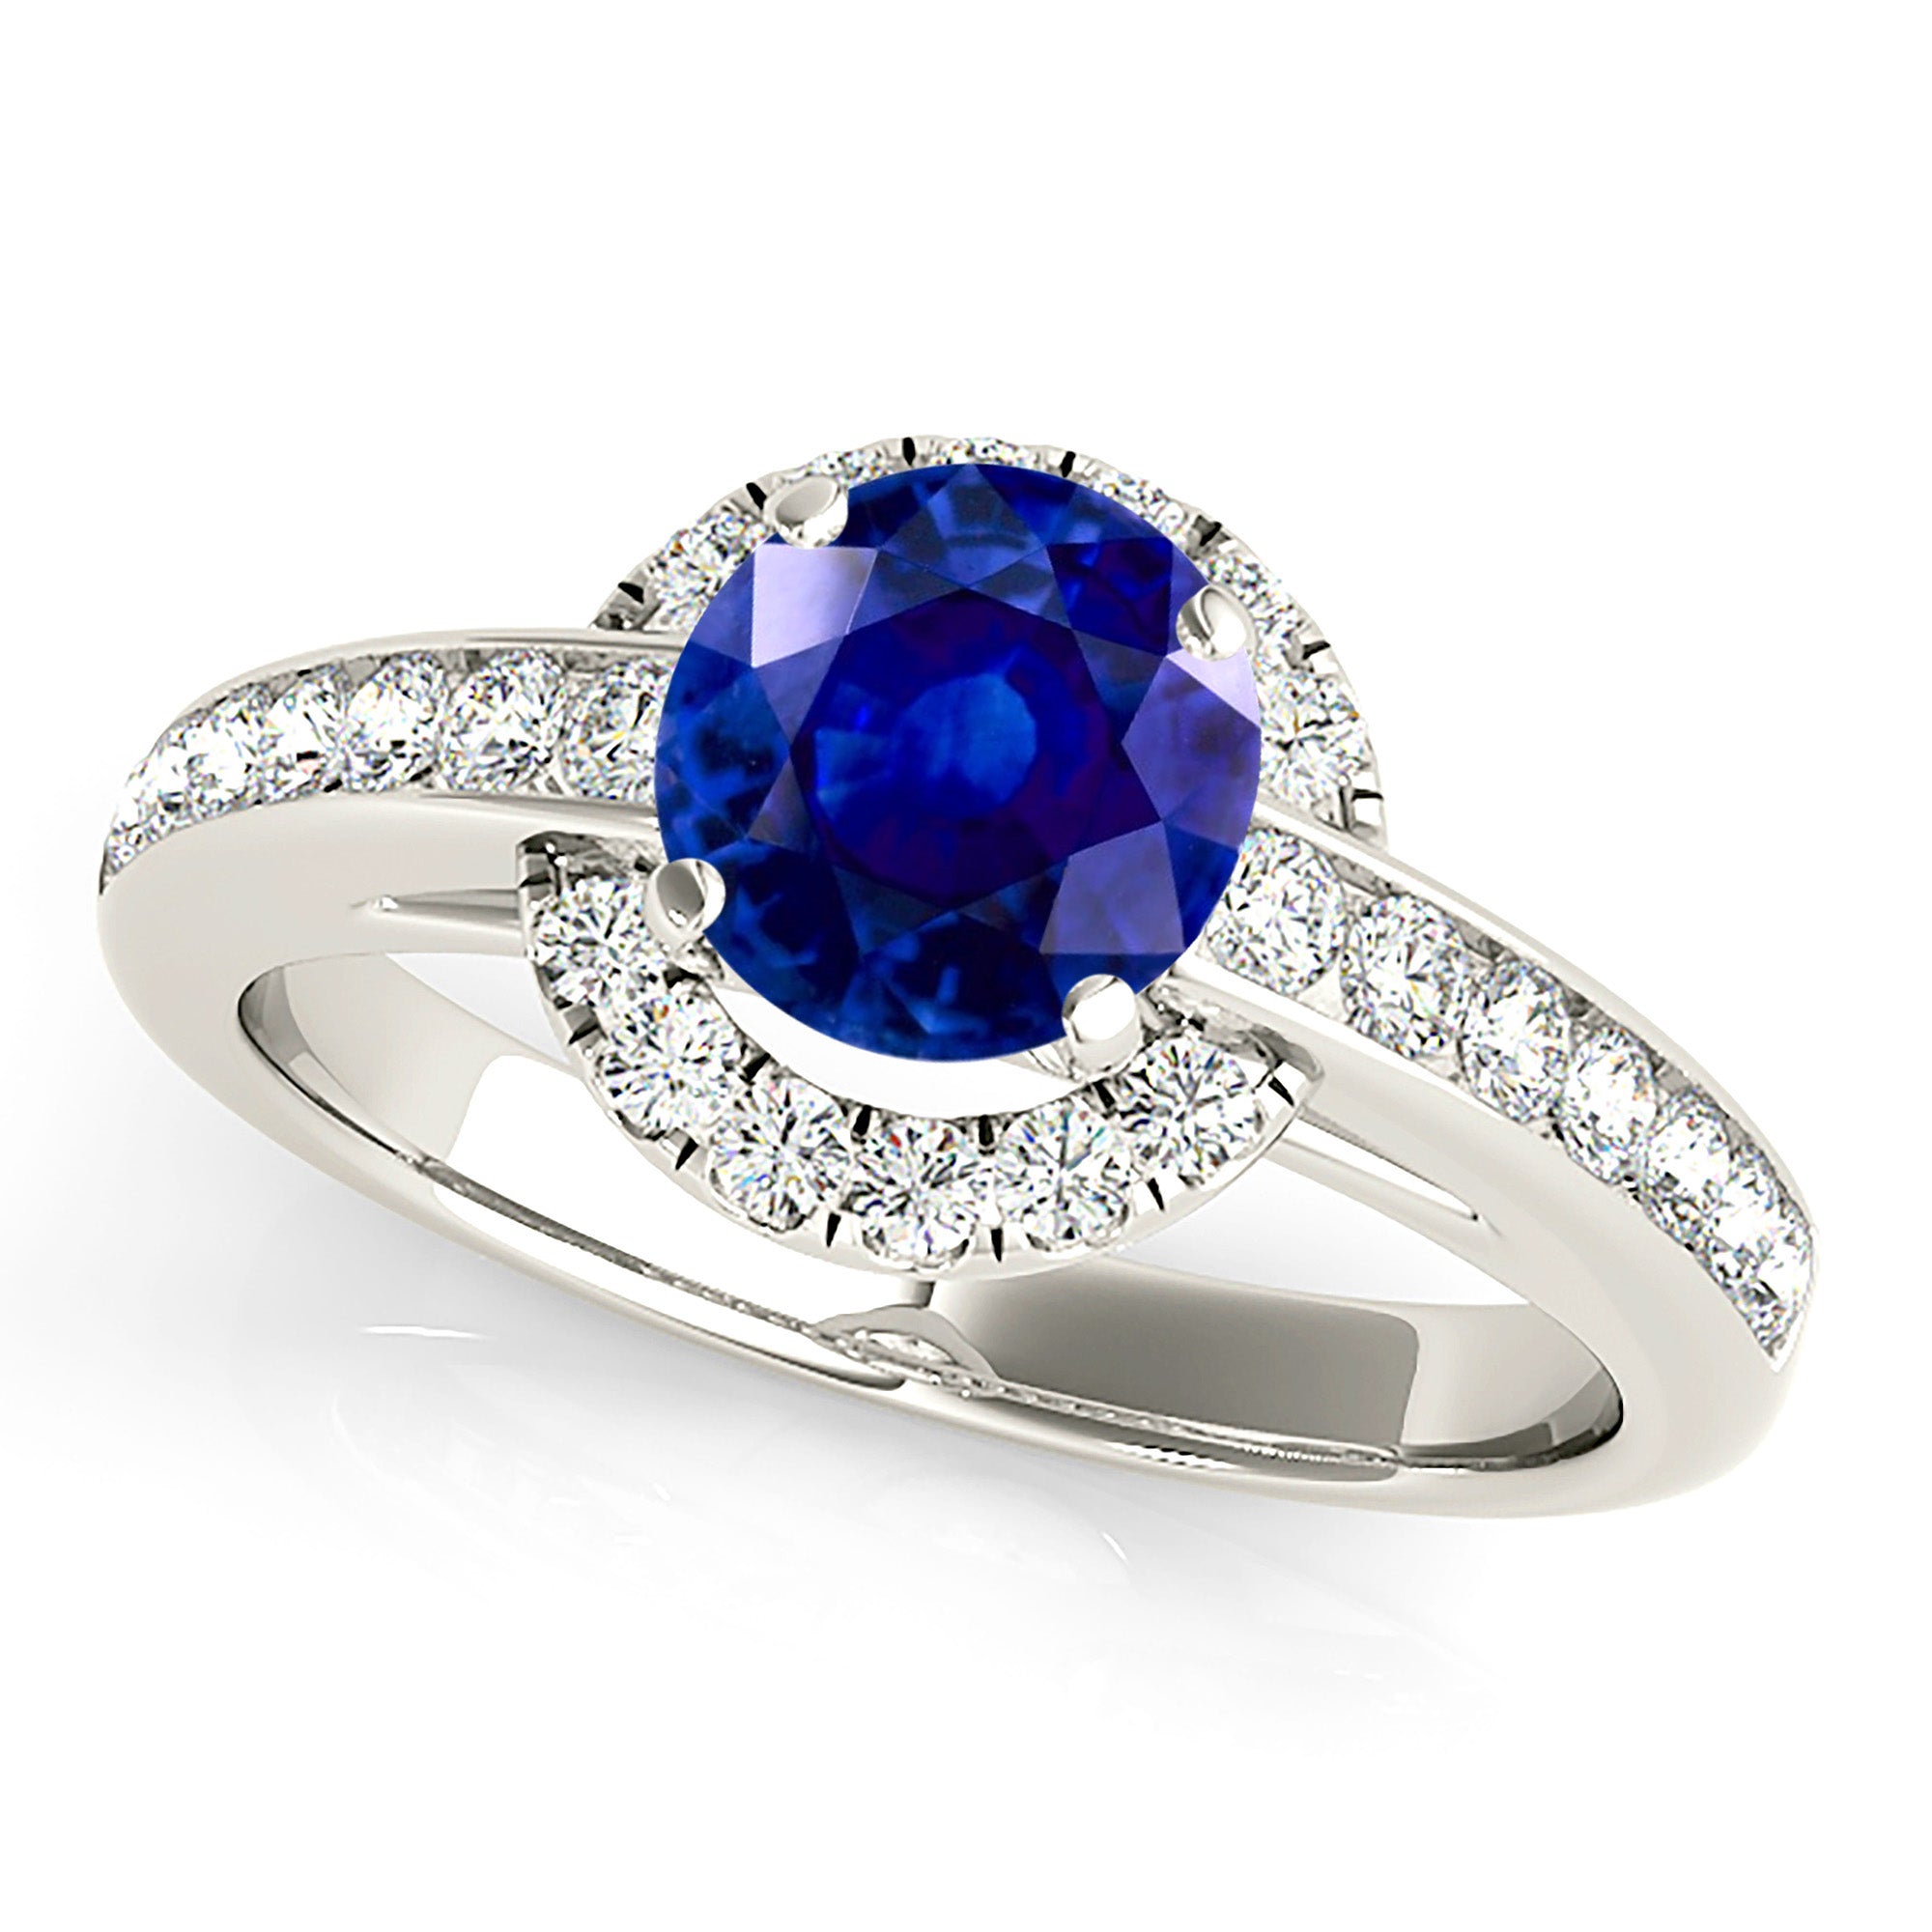 1.80 ct. Genuine Blue Sapphire Ring With 0.40 ctw. Diamond Underneath Halo, Cathedral Style Diamond Band | Natural Blue Sapphire Halo Ring-in 14K/18K White, Yellow, Rose Gold and Platinum - Christmas Jewelry Gift -VIRABYANI